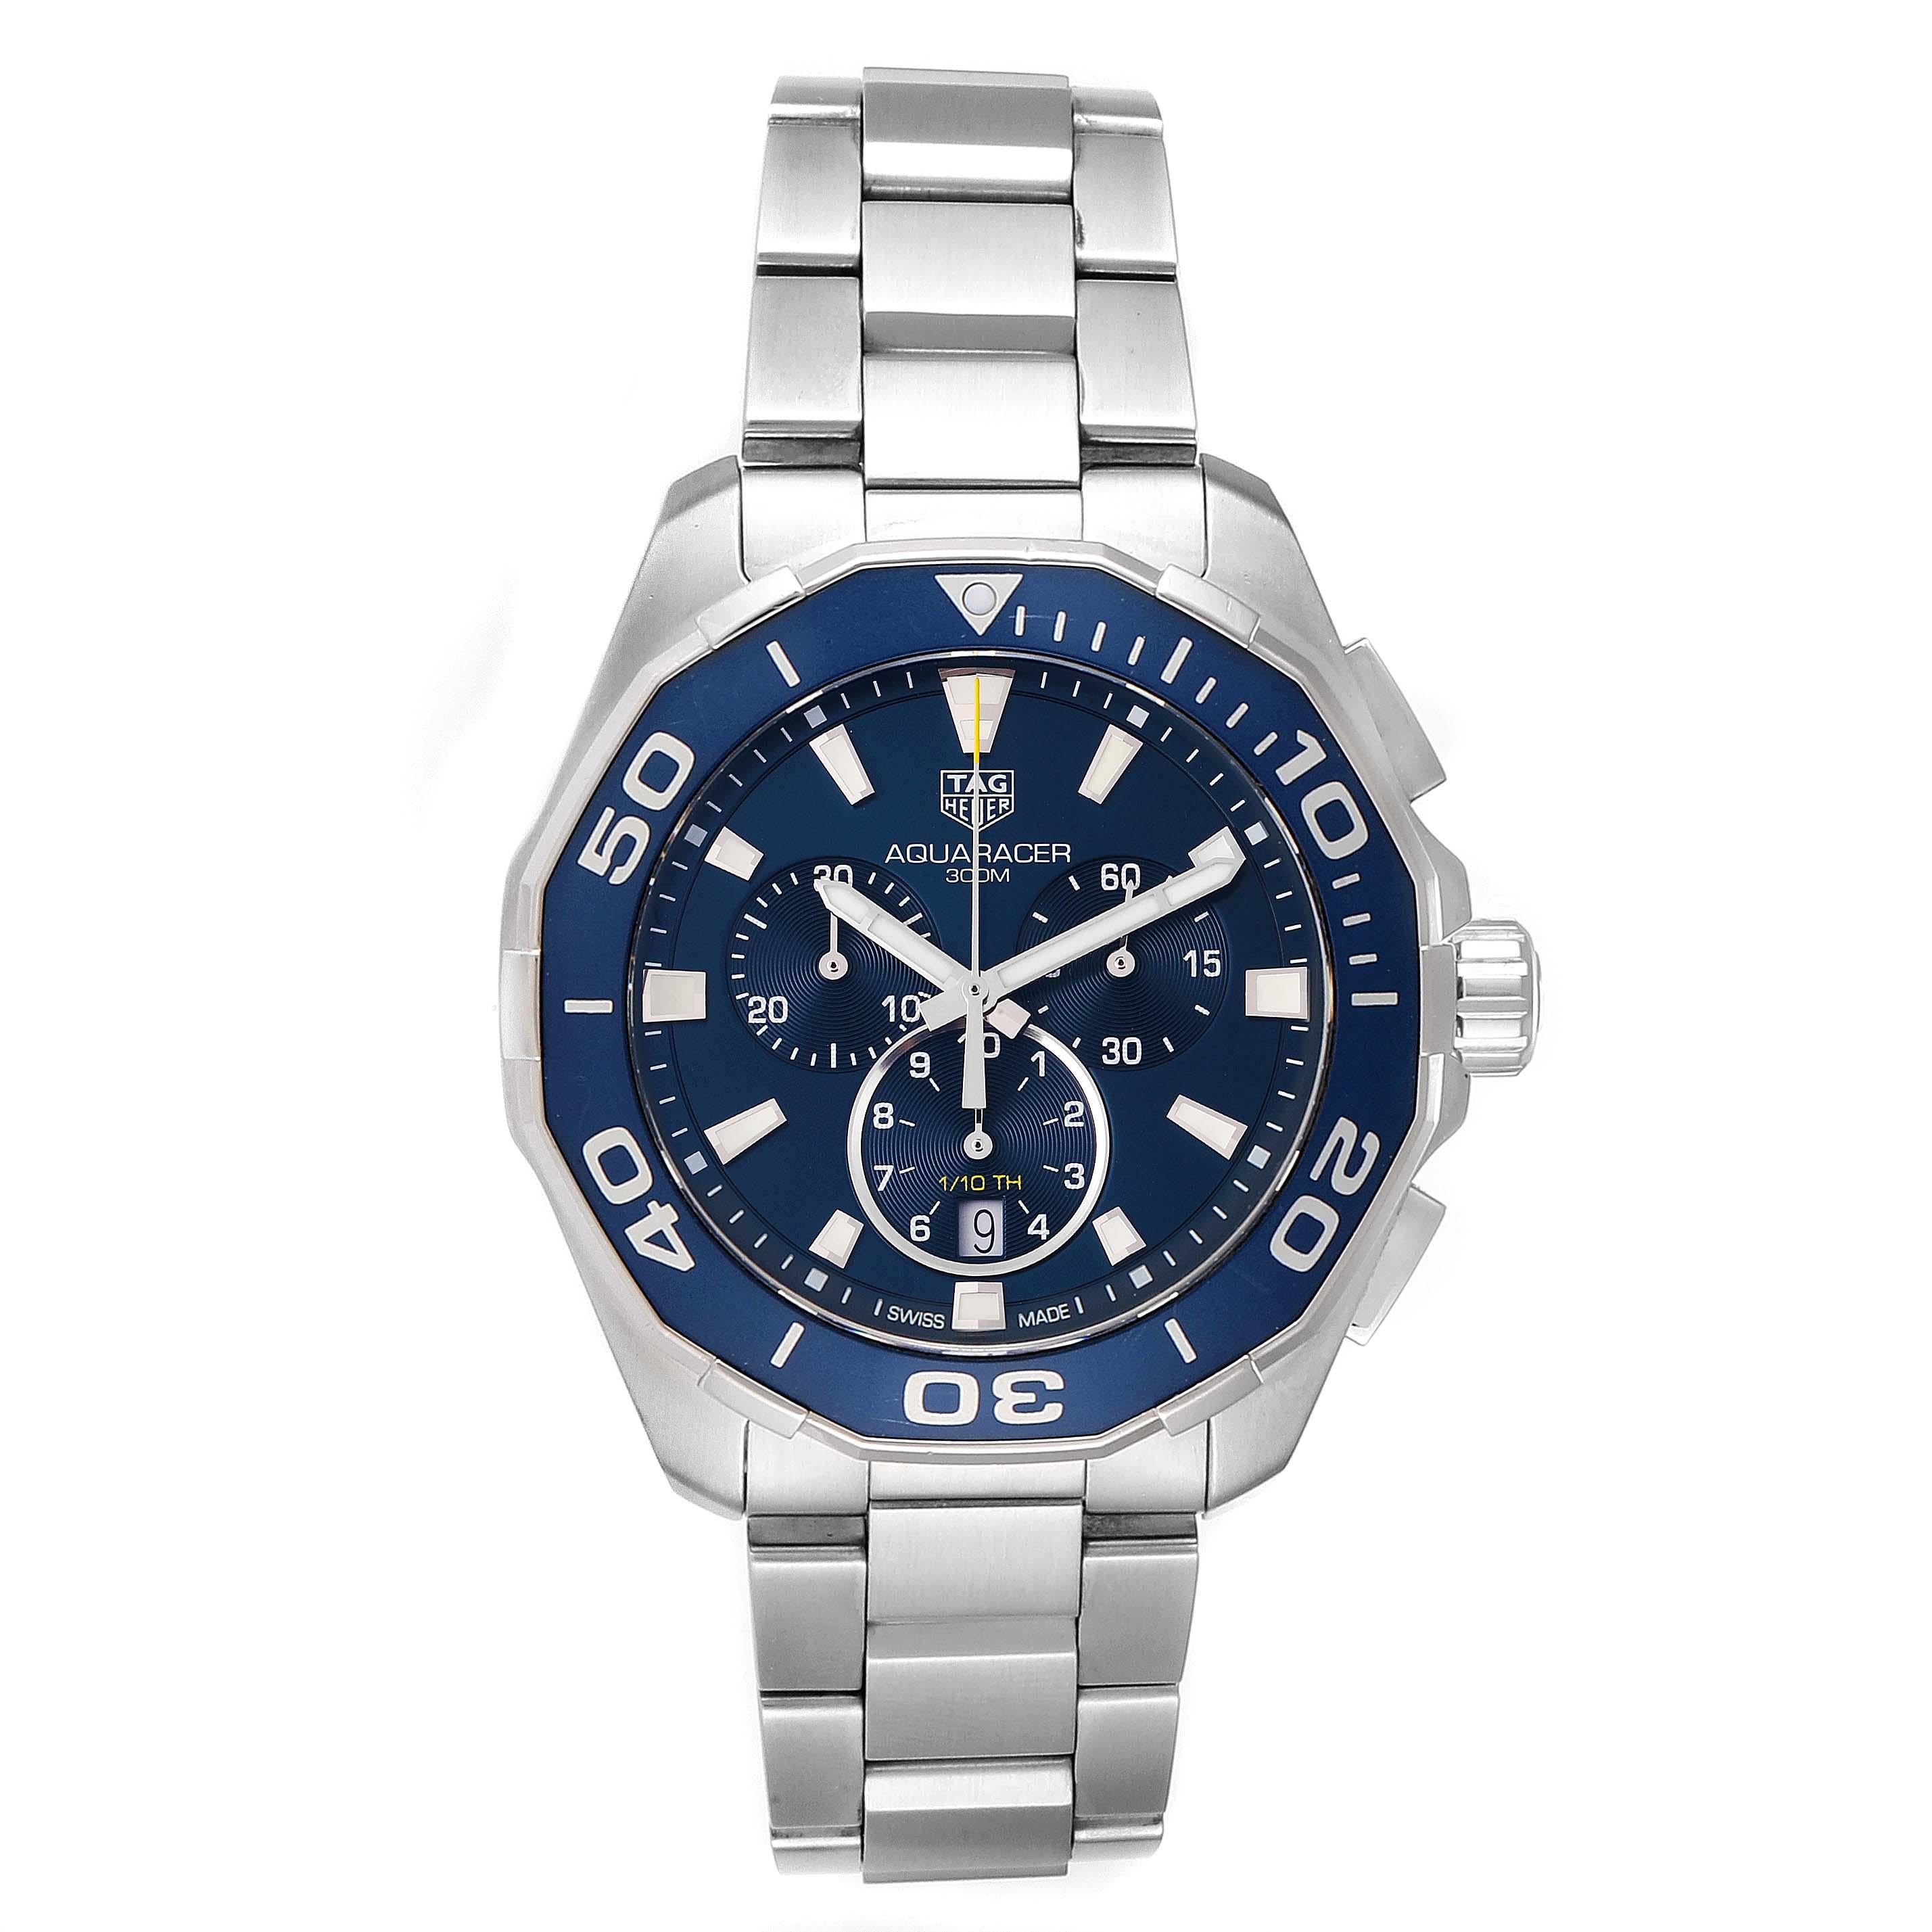 Tag Heuer Aquaracer Blue Dial Chronograph Mens Watch CAY111B Box Card. Quartz movement. Stainless steel case 43.0 mm in diameter. Case Thickness: 15 mm. Blue ion-plared unidirectional rotating bezel. Scratch resistant sapphire crystal. Blue dial